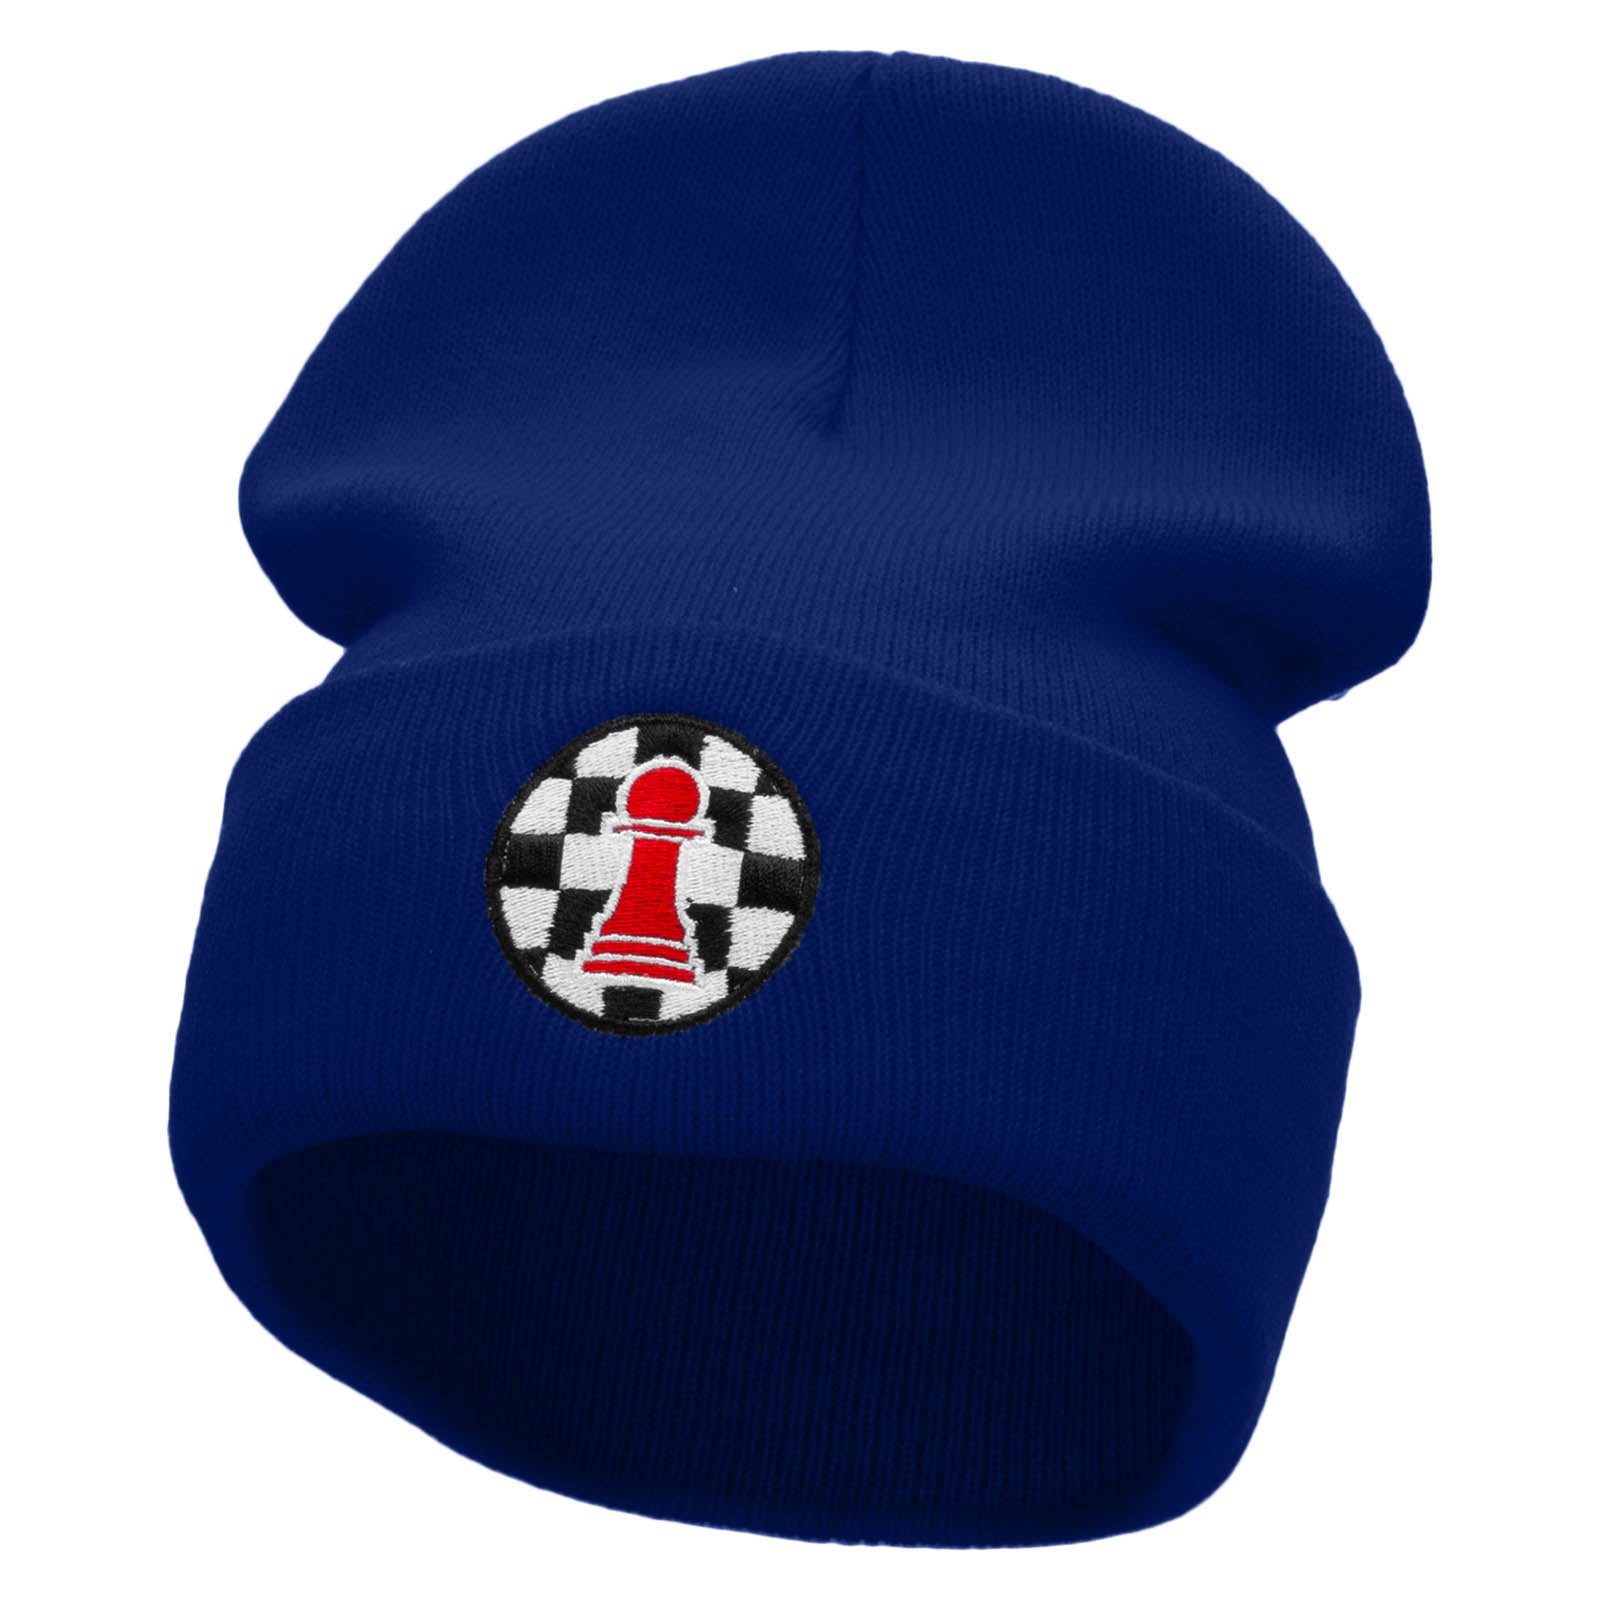 Pawn Chess Piece Embroidered 12 Inch Long Knitted Beanie - Royal OSFM